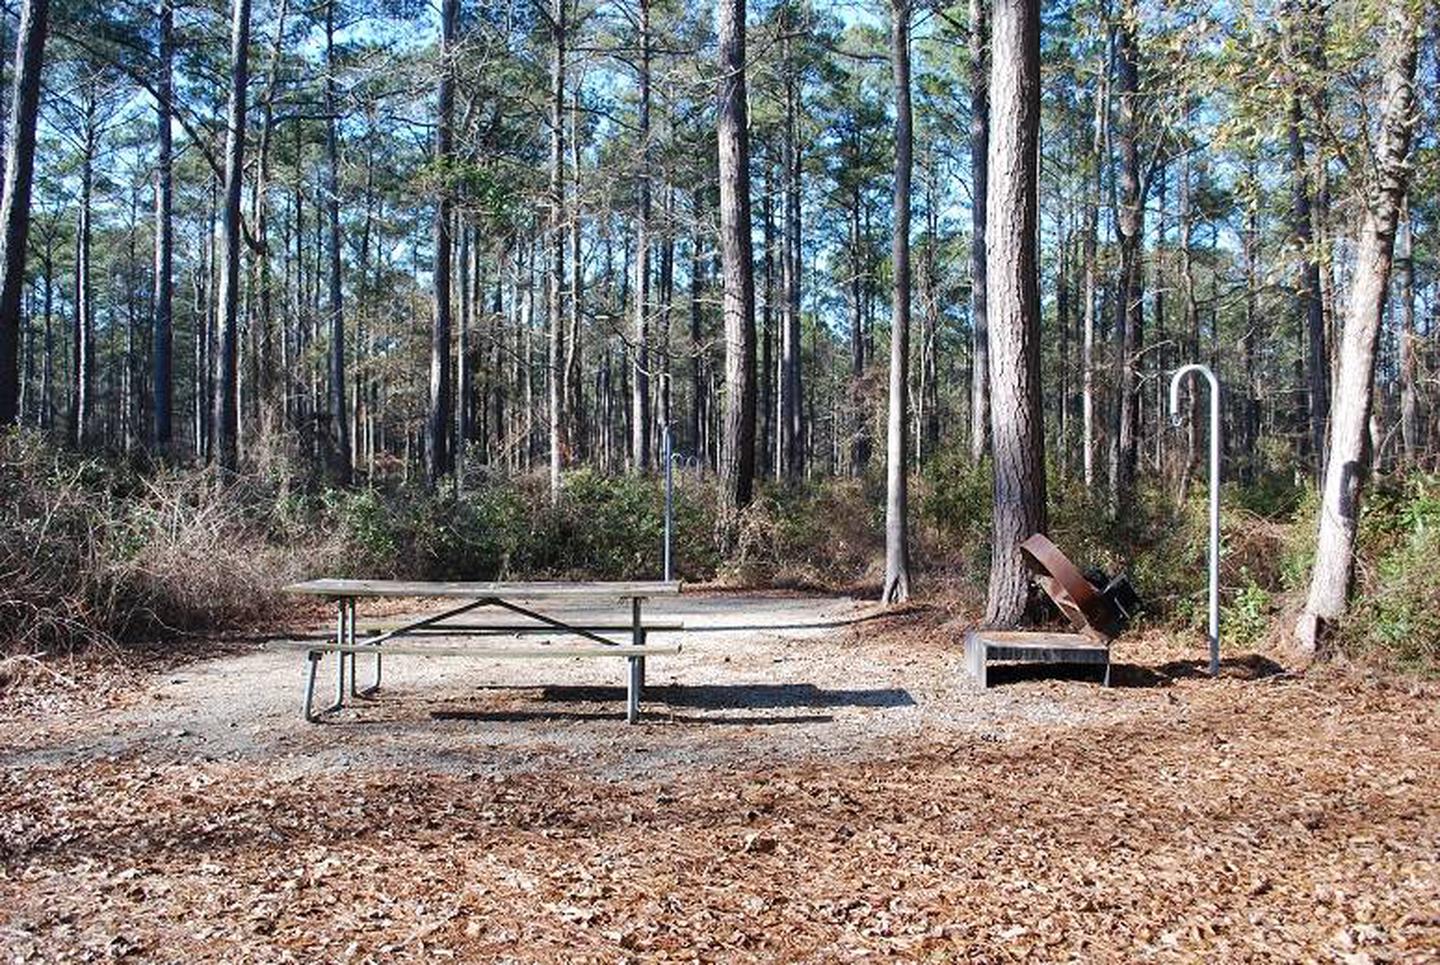 Oyster Point Campsite #6First Come-First Served Basic Campsite - Tent Pad, Picnic Table, Fire Ring, Lantern Post